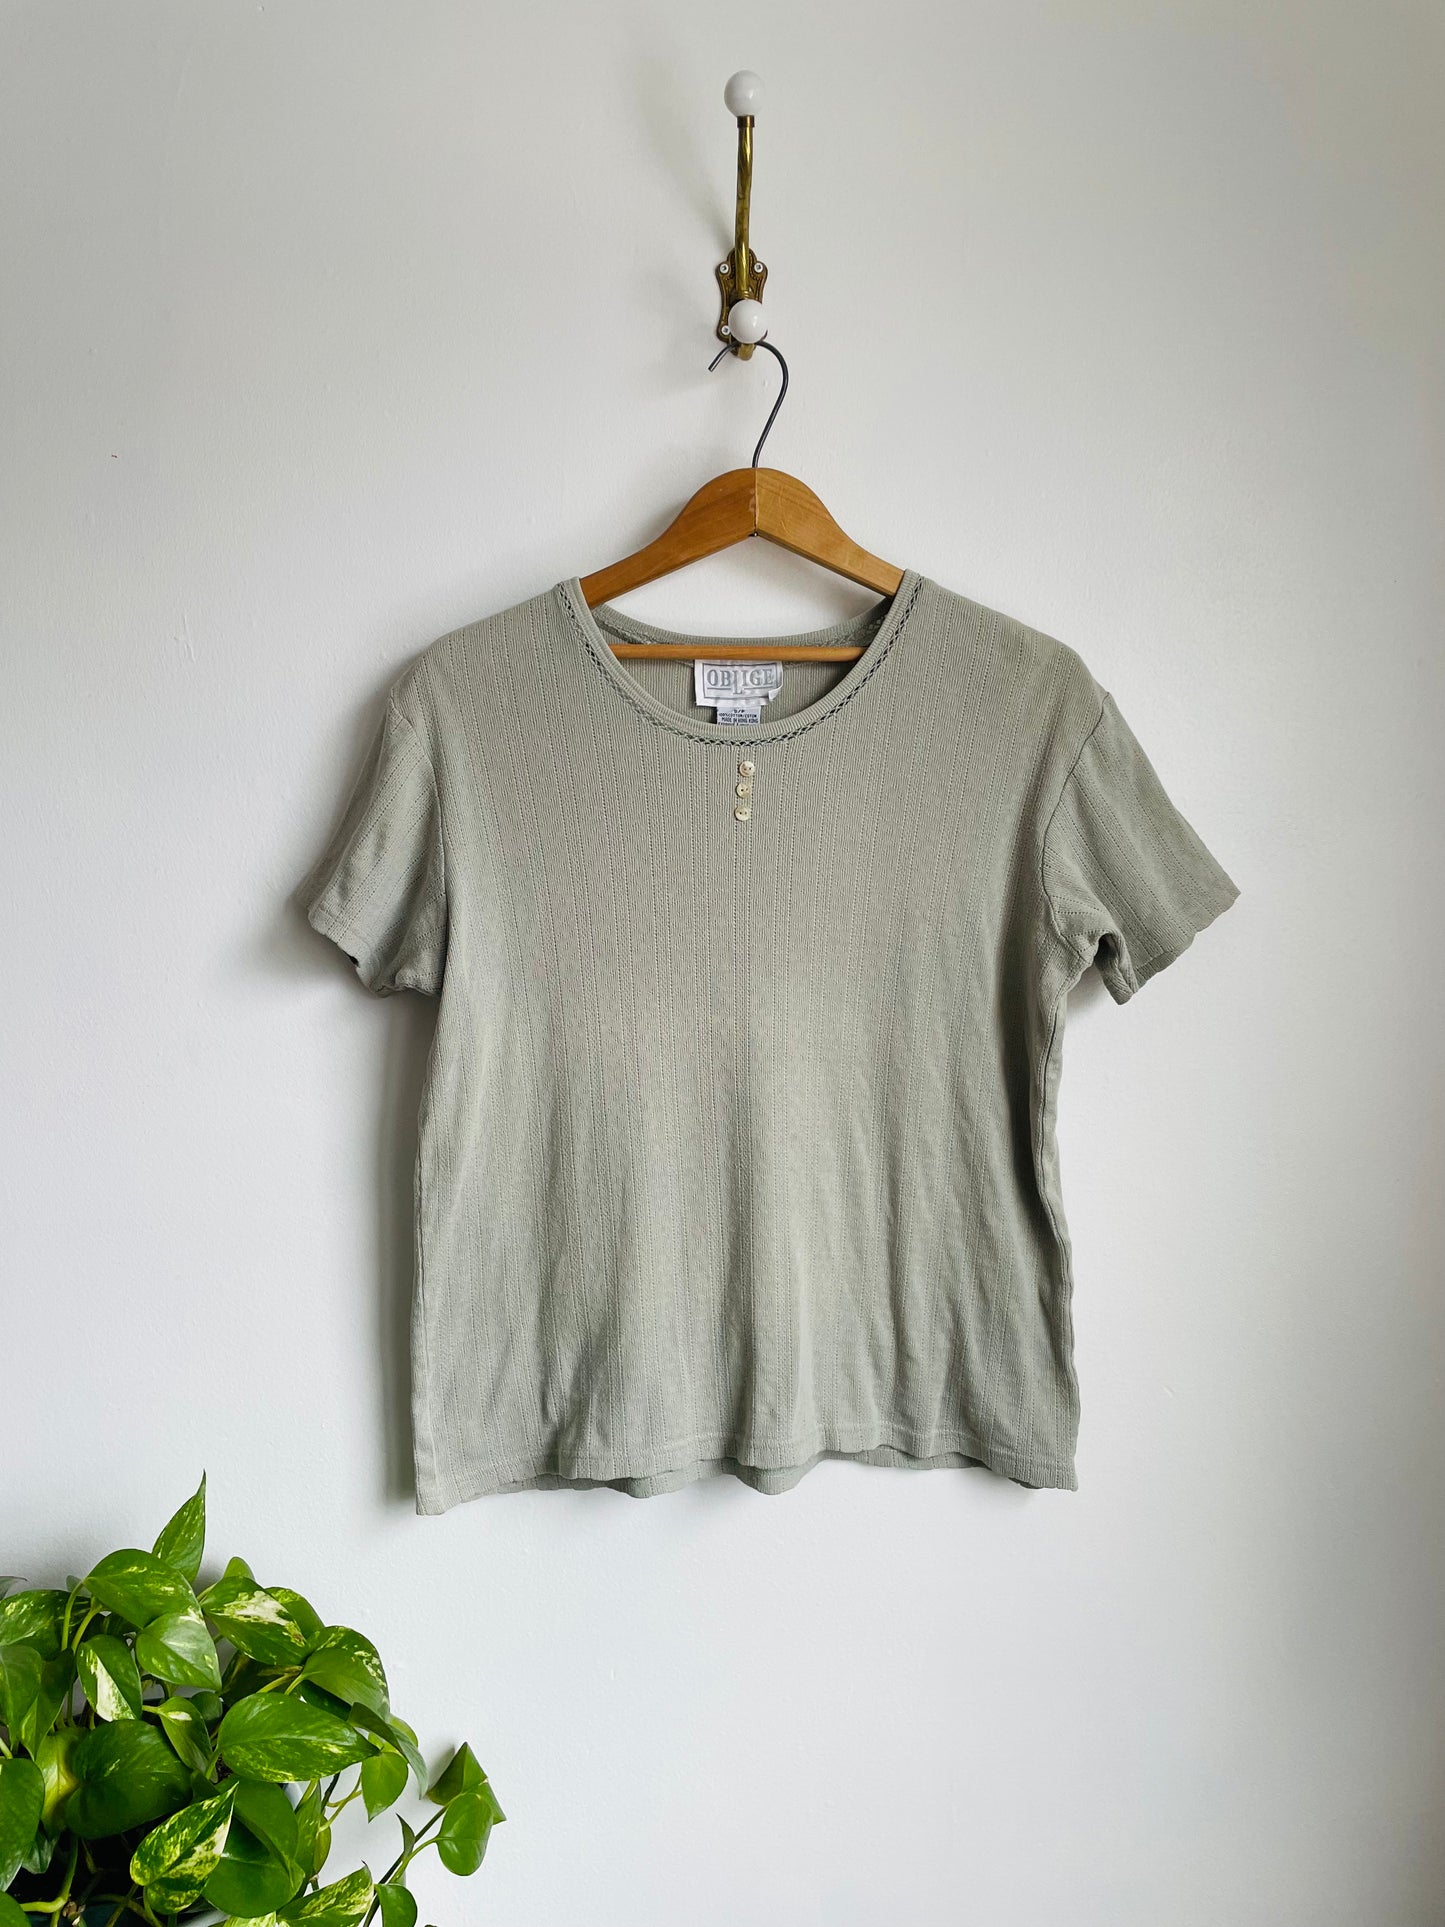 Oblige 100% Cotton Sage Green Cottagecore T-Shirt - Made in Hong Kong - Size Small